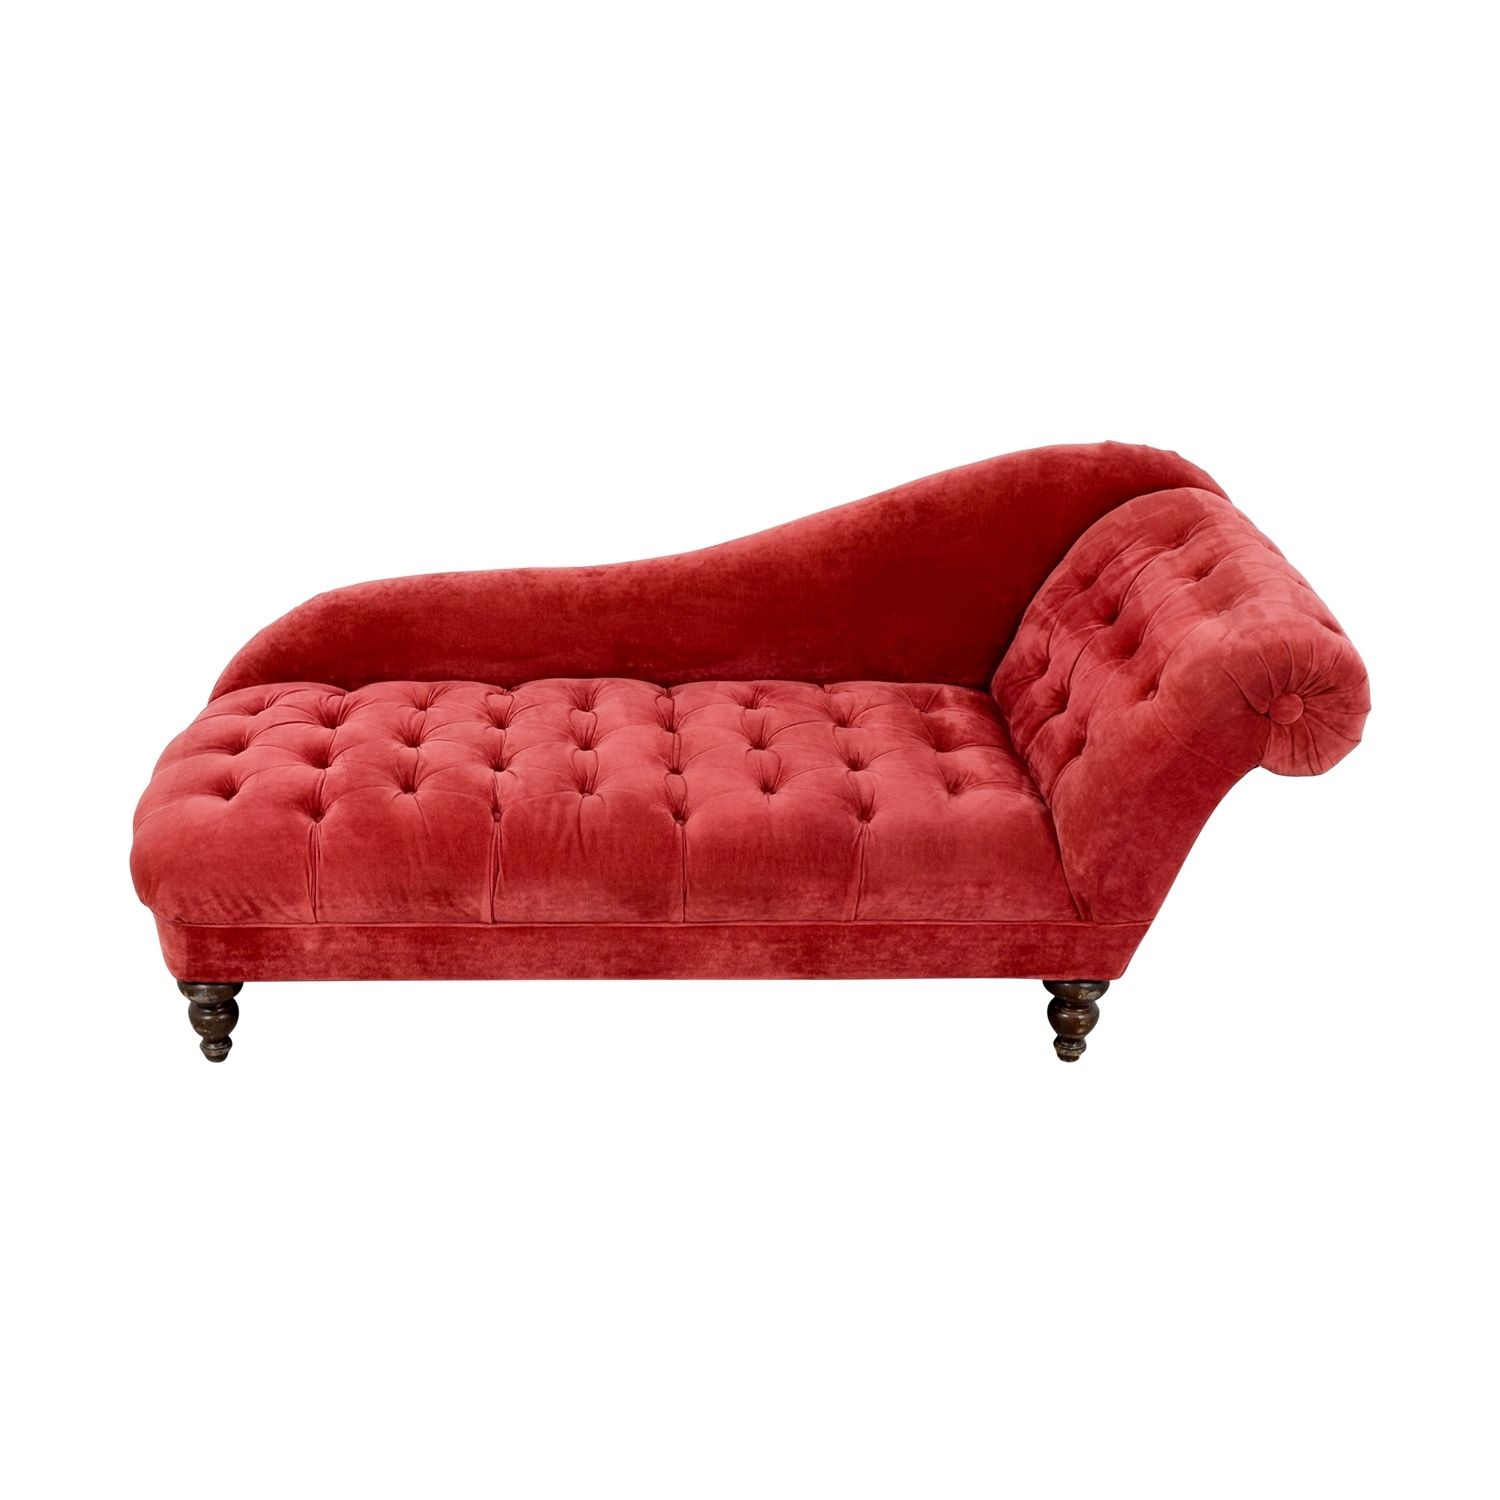 [%71% Off – Domain Home Furnishings Domain Home Furnishings Red Intended For Fashionable Red Chaises|red Chaises Throughout 2017 71% Off – Domain Home Furnishings Domain Home Furnishings Red|best And Newest Red Chaises Pertaining To 71% Off – Domain Home Furnishings Domain Home Furnishings Red|2018 71% Off – Domain Home Furnishings Domain Home Furnishings Red Within Red Chaises%] (Photo 10 of 15)